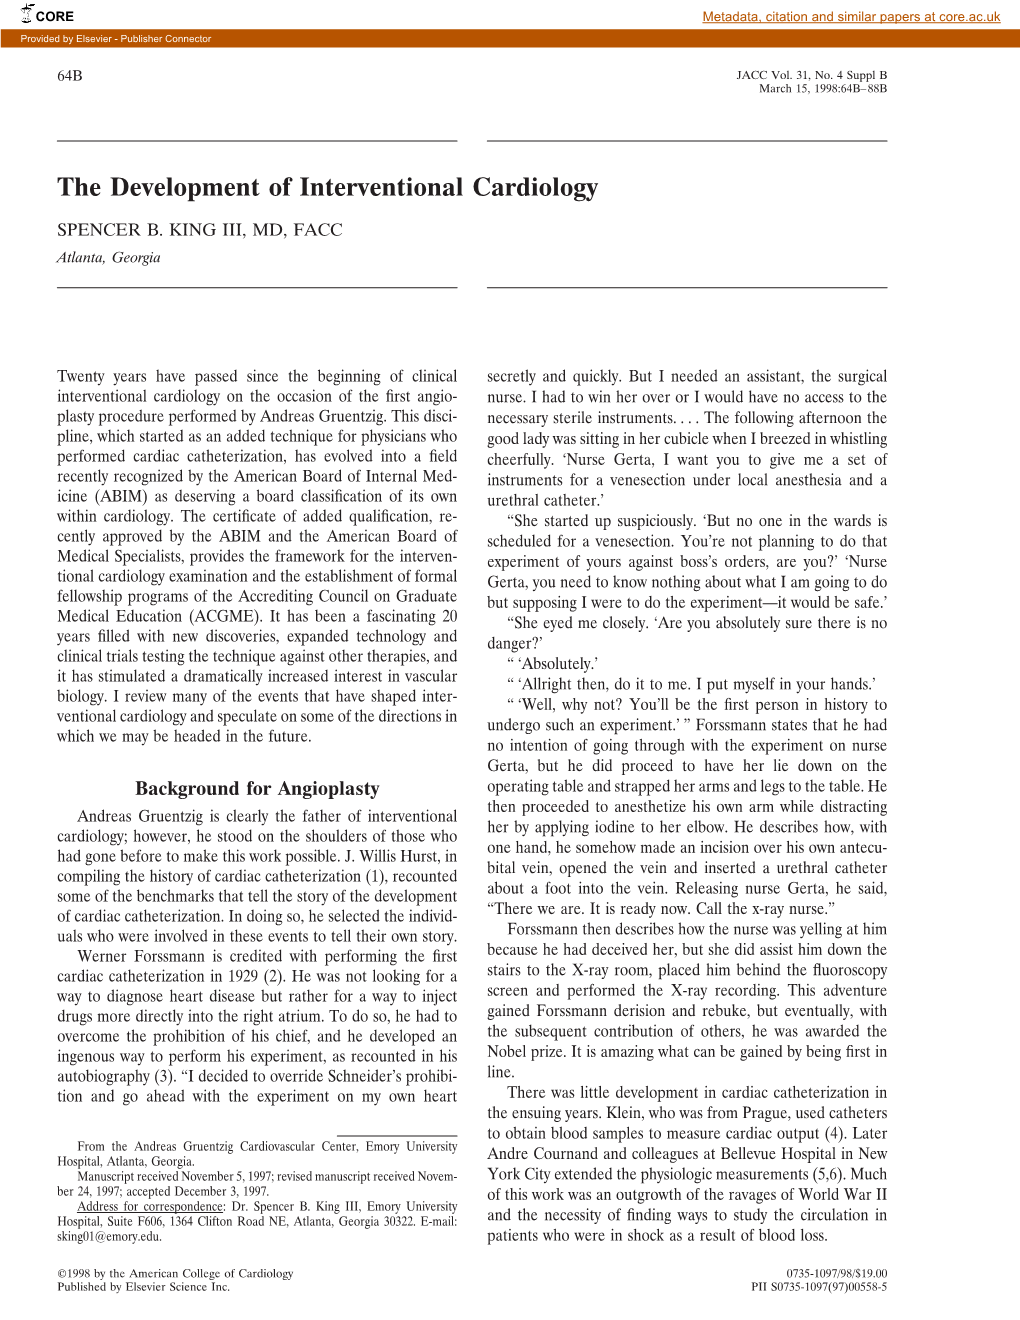 The Development of Interventional Cardiology